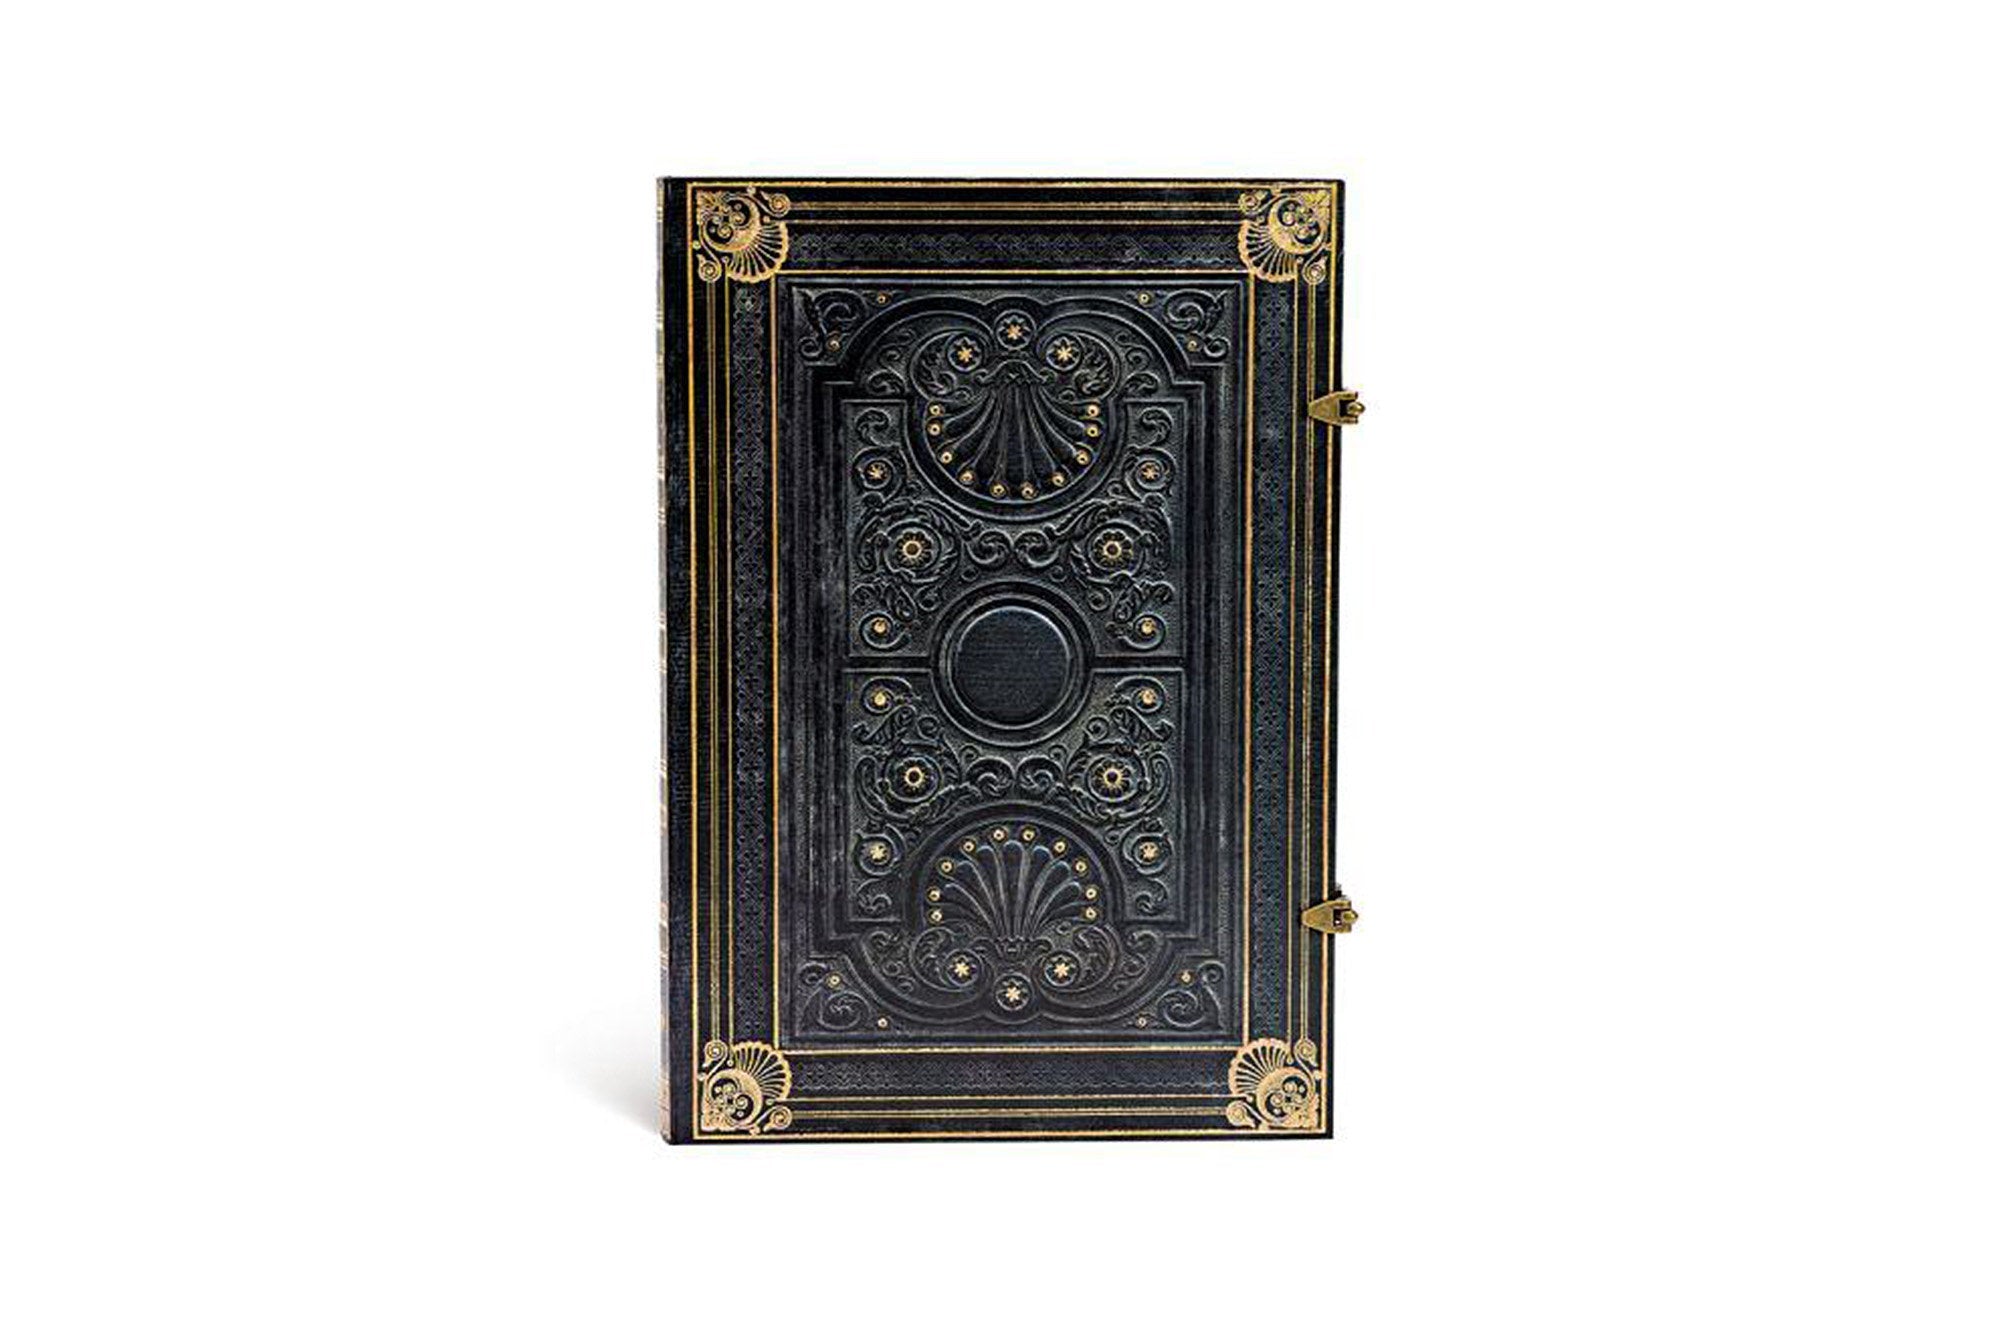 Nocturnelle, Restoration-style Lined Journal, with Gilt Cover and Metal Latches, Lined, Paperblanks, 8.25in x 11.75in